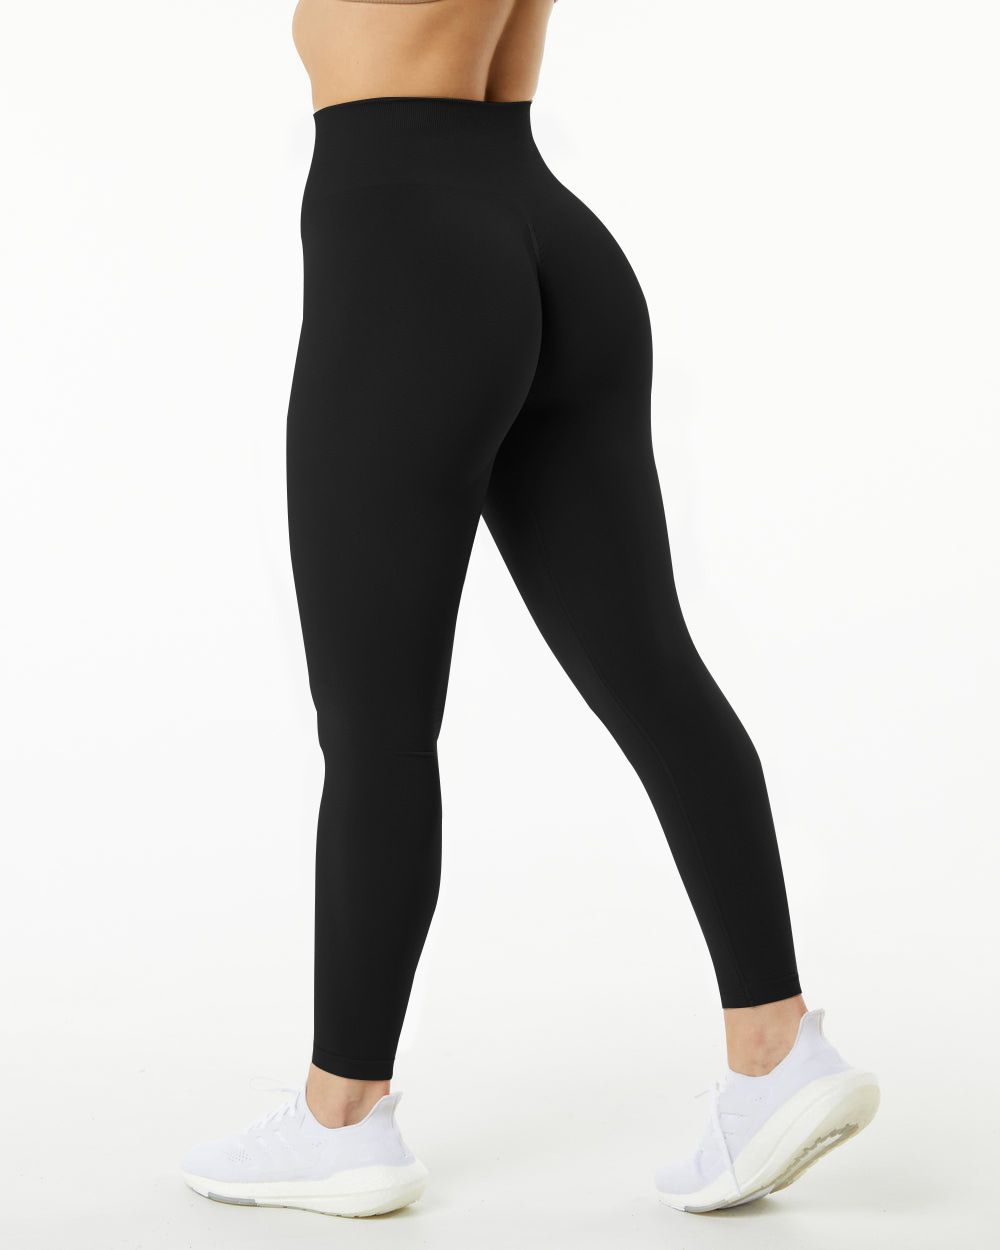 2023 New Lulu Nude Feel Fitness Yoga Pants Female Tight High Elastic High Waist Hip Lift Quick-Drying Summer Thin Trousers